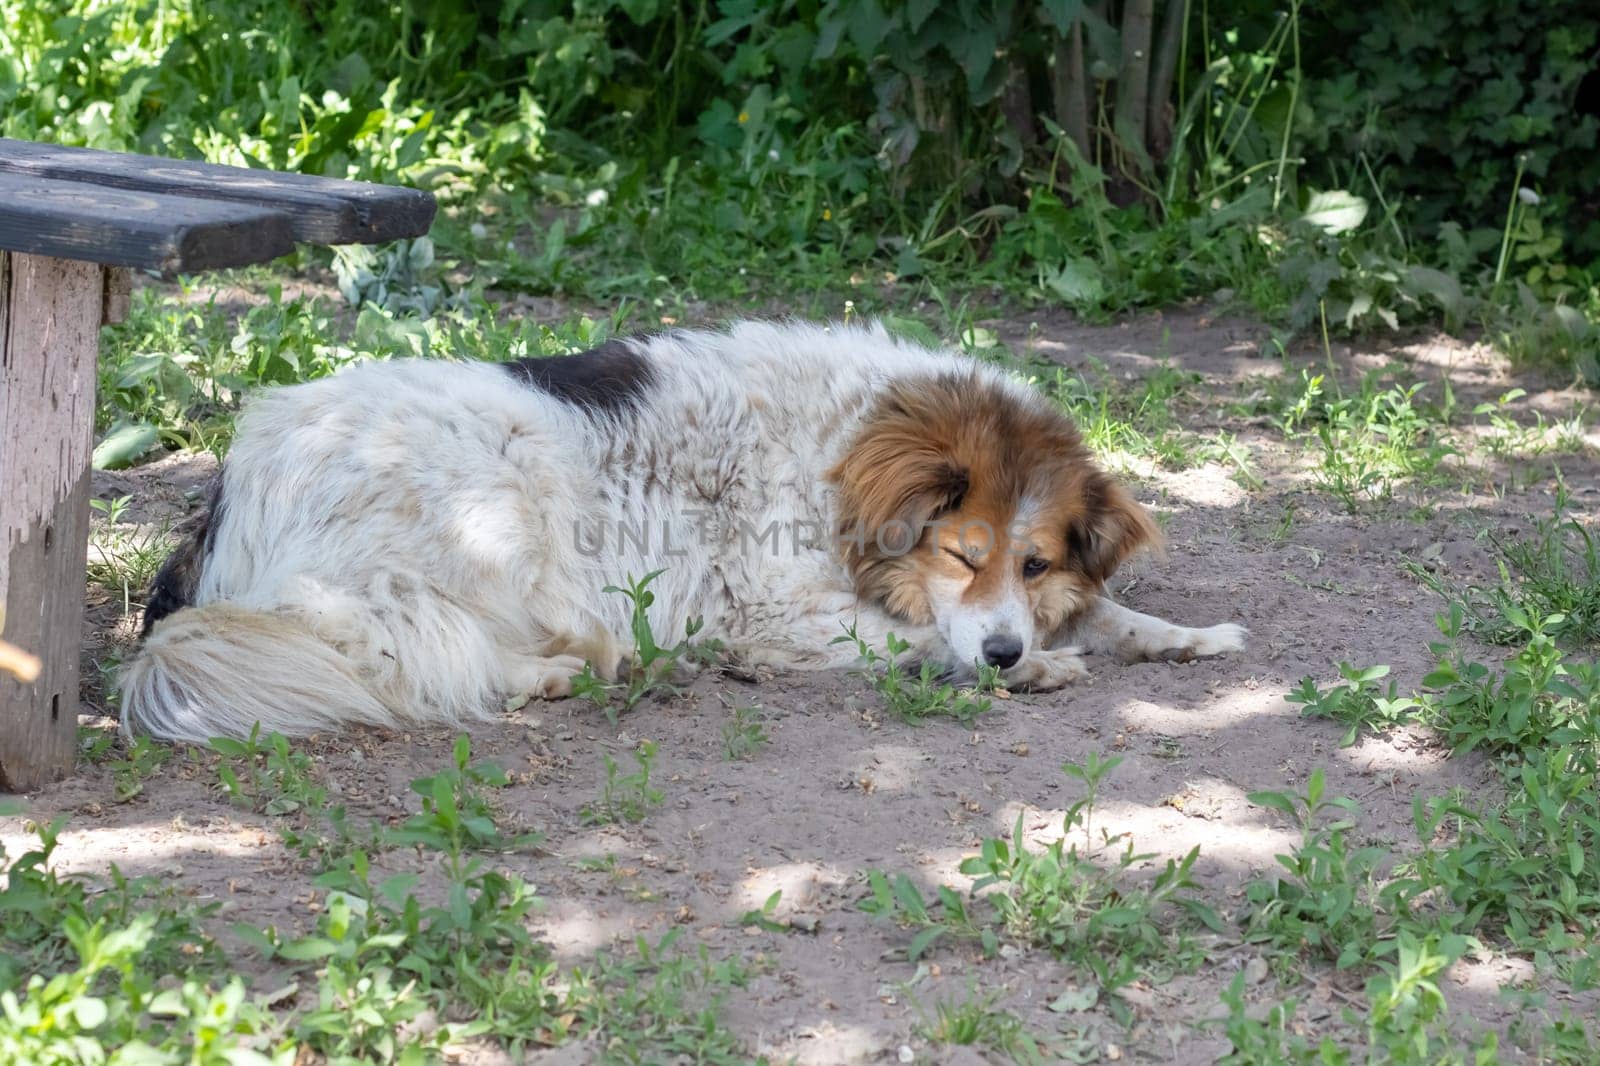 Shaggy white dog lying on the ground in the yard